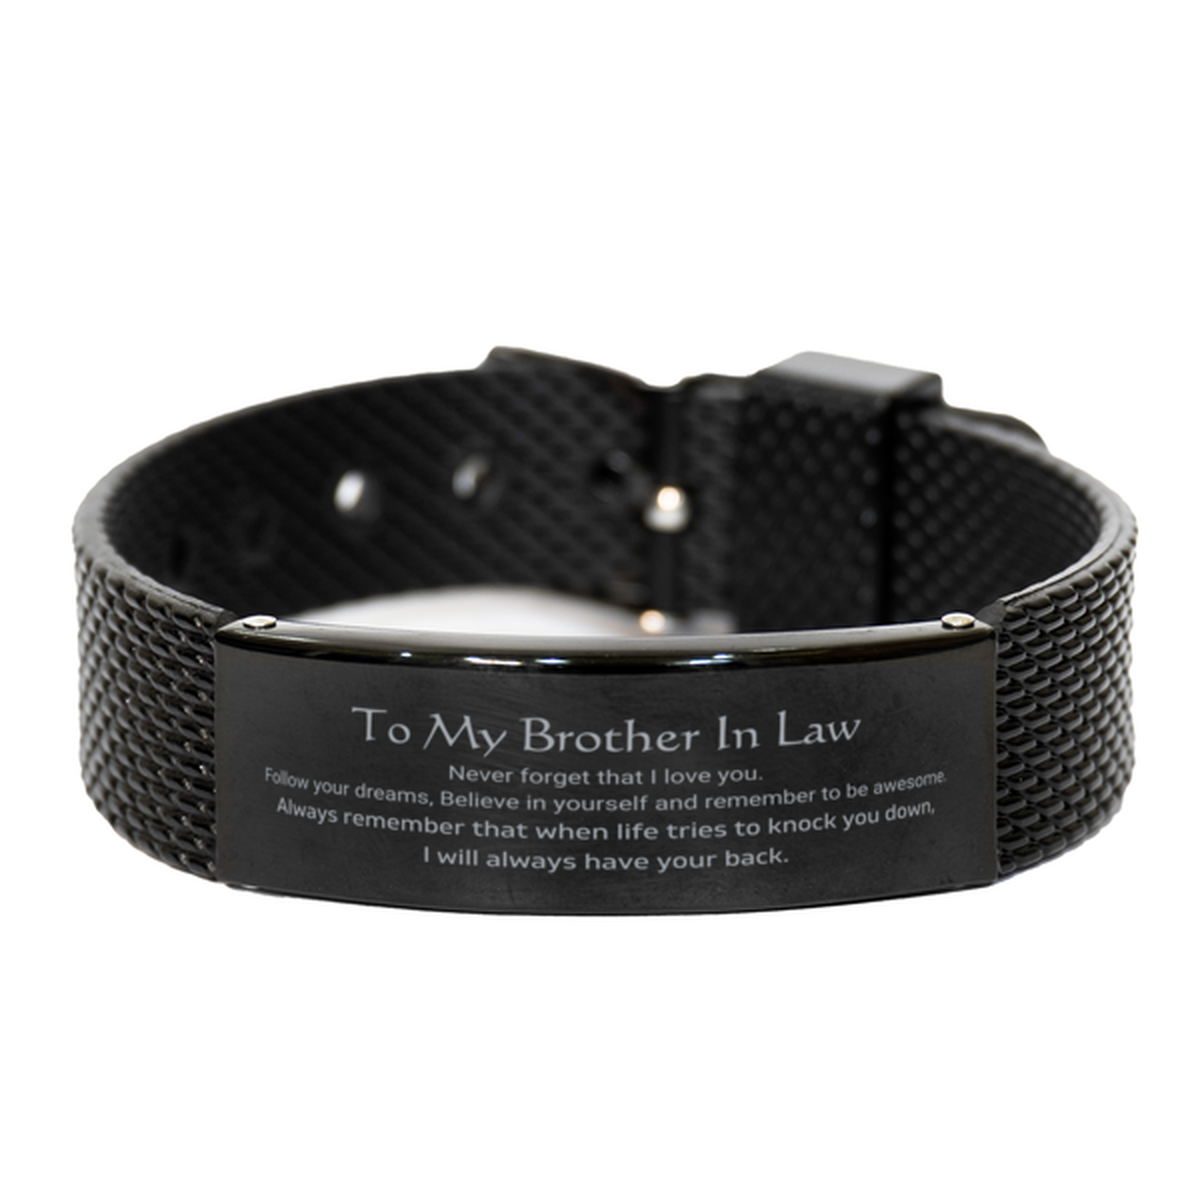 Inspirational Gifts for Brother In Law, Follow your dreams, Believe in yourself, Brother In Law Black Shark Mesh Bracelet, Birthday Christmas Unique Gifts For Brother In Law